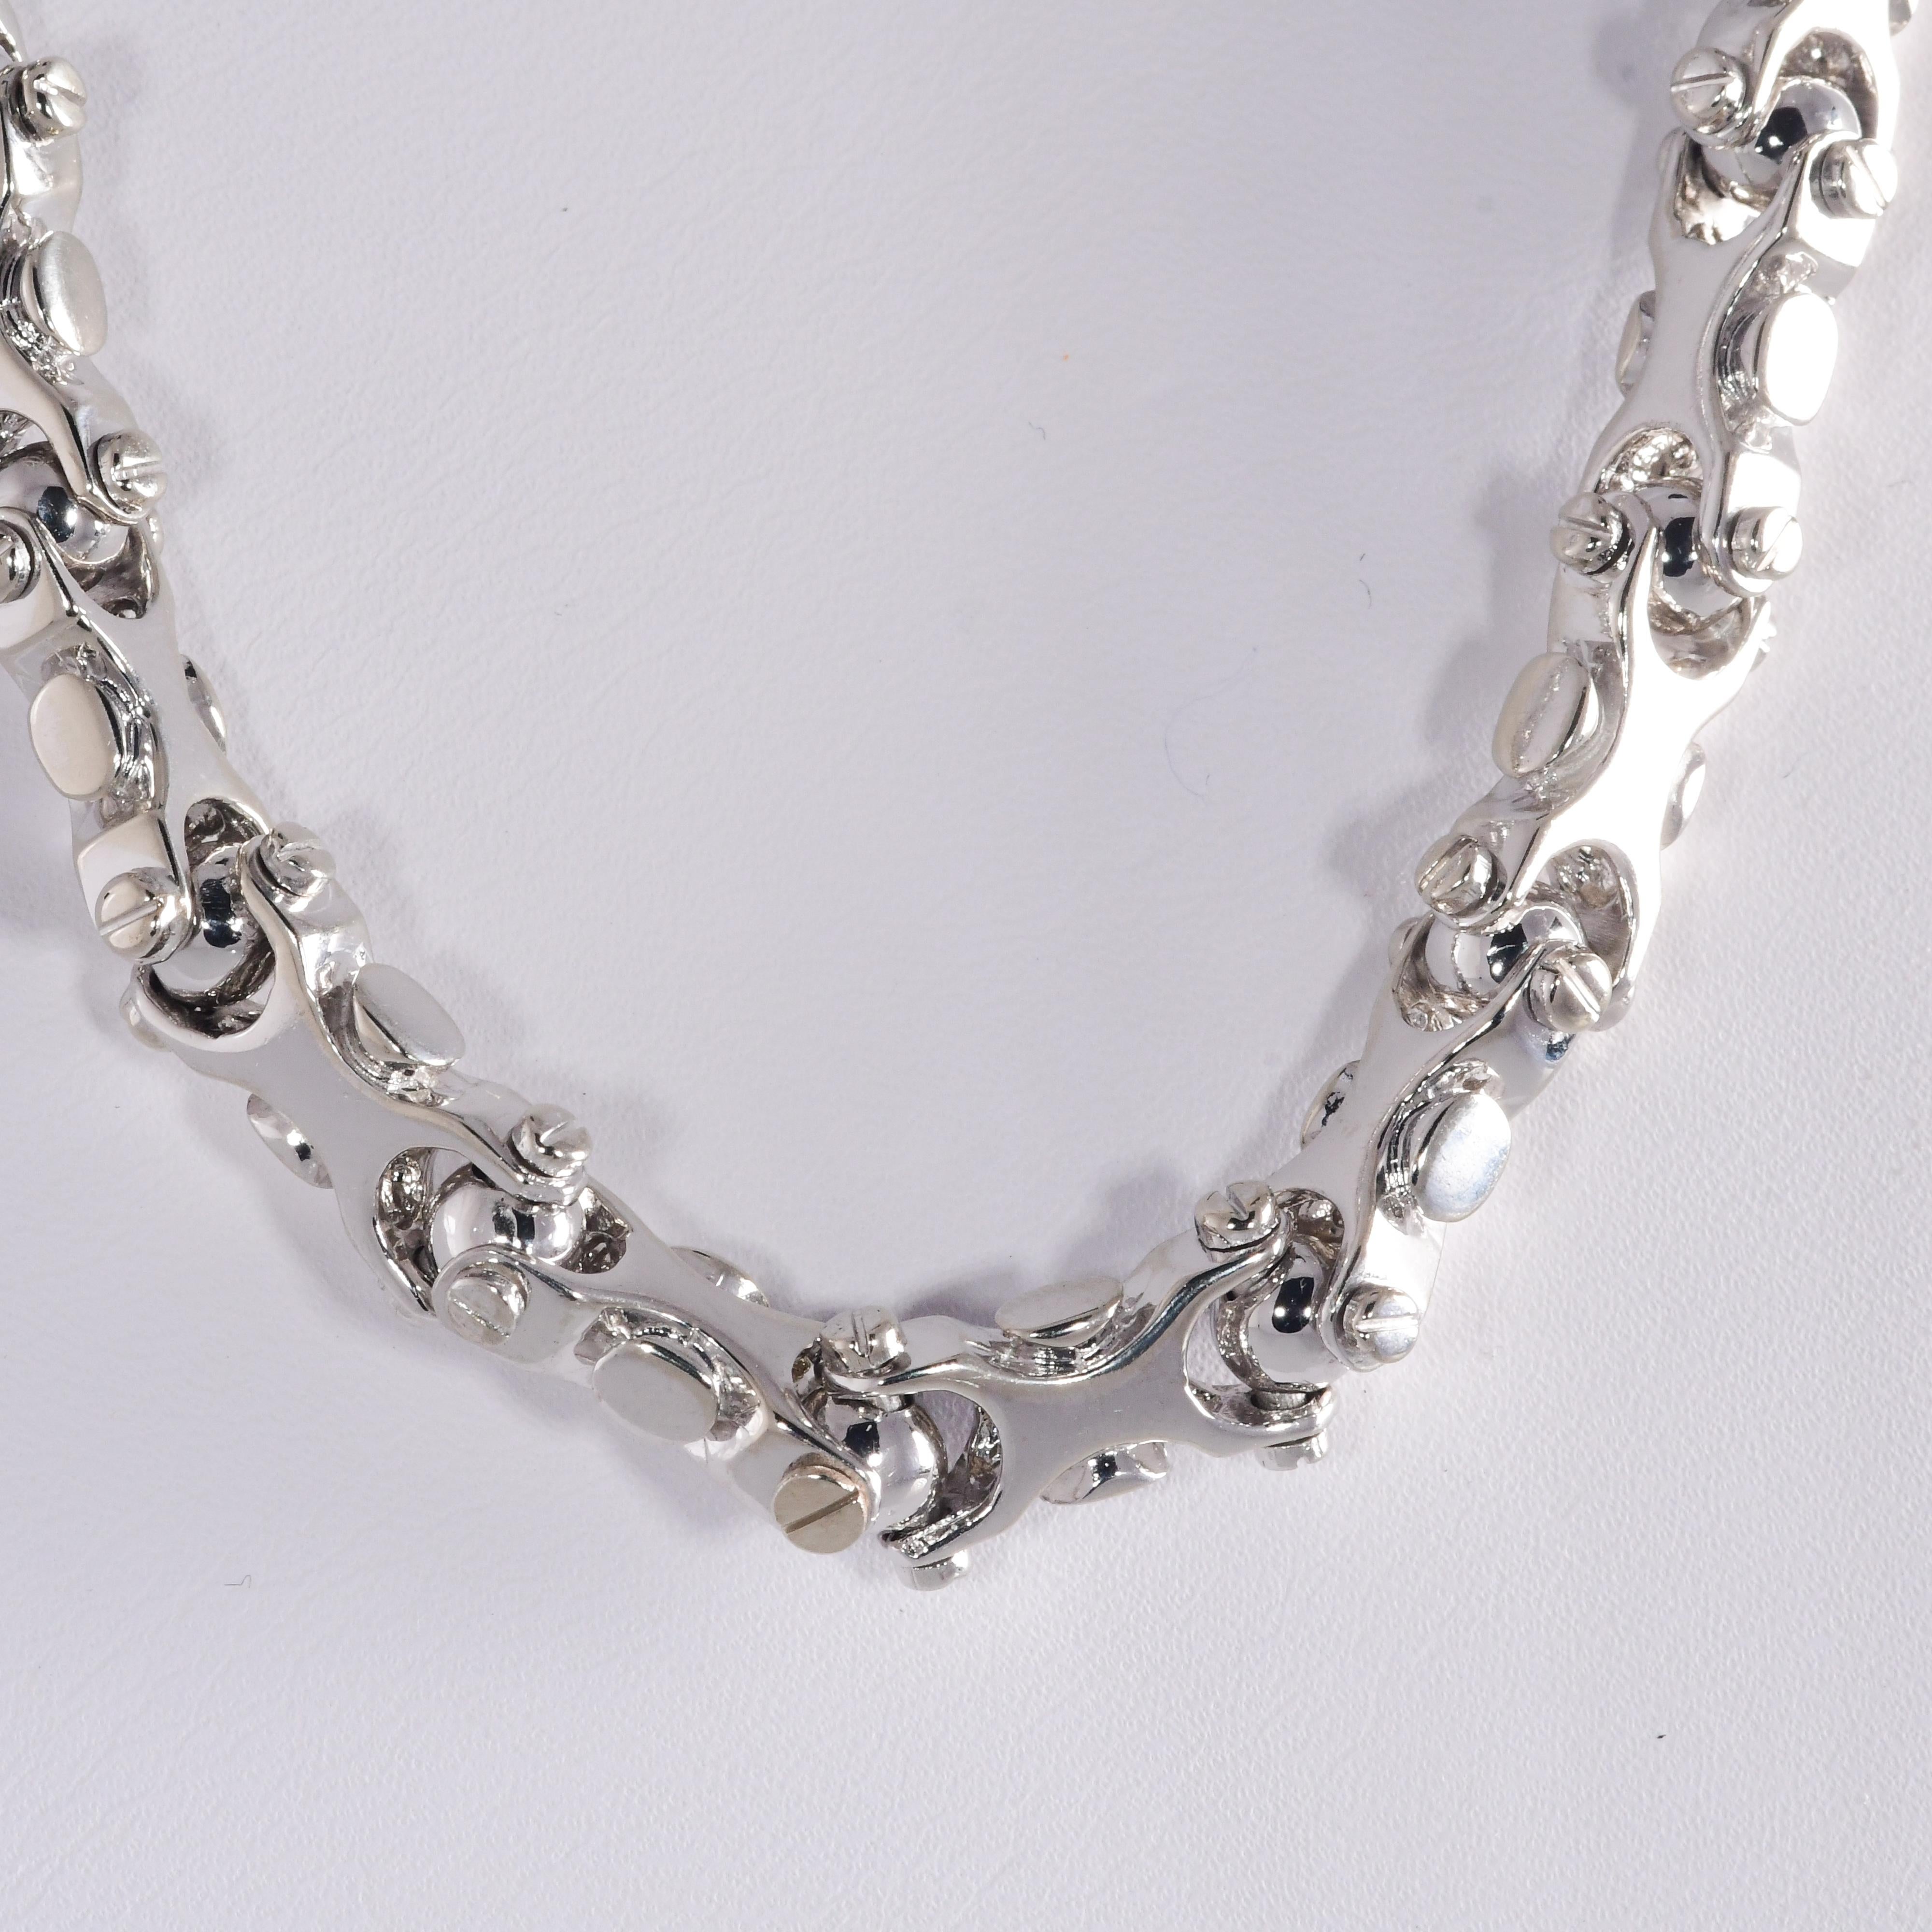 14 Karat White Gold Solid Solid Modified Link Chain 20 Inches and 143.0 Grams For Sale 1